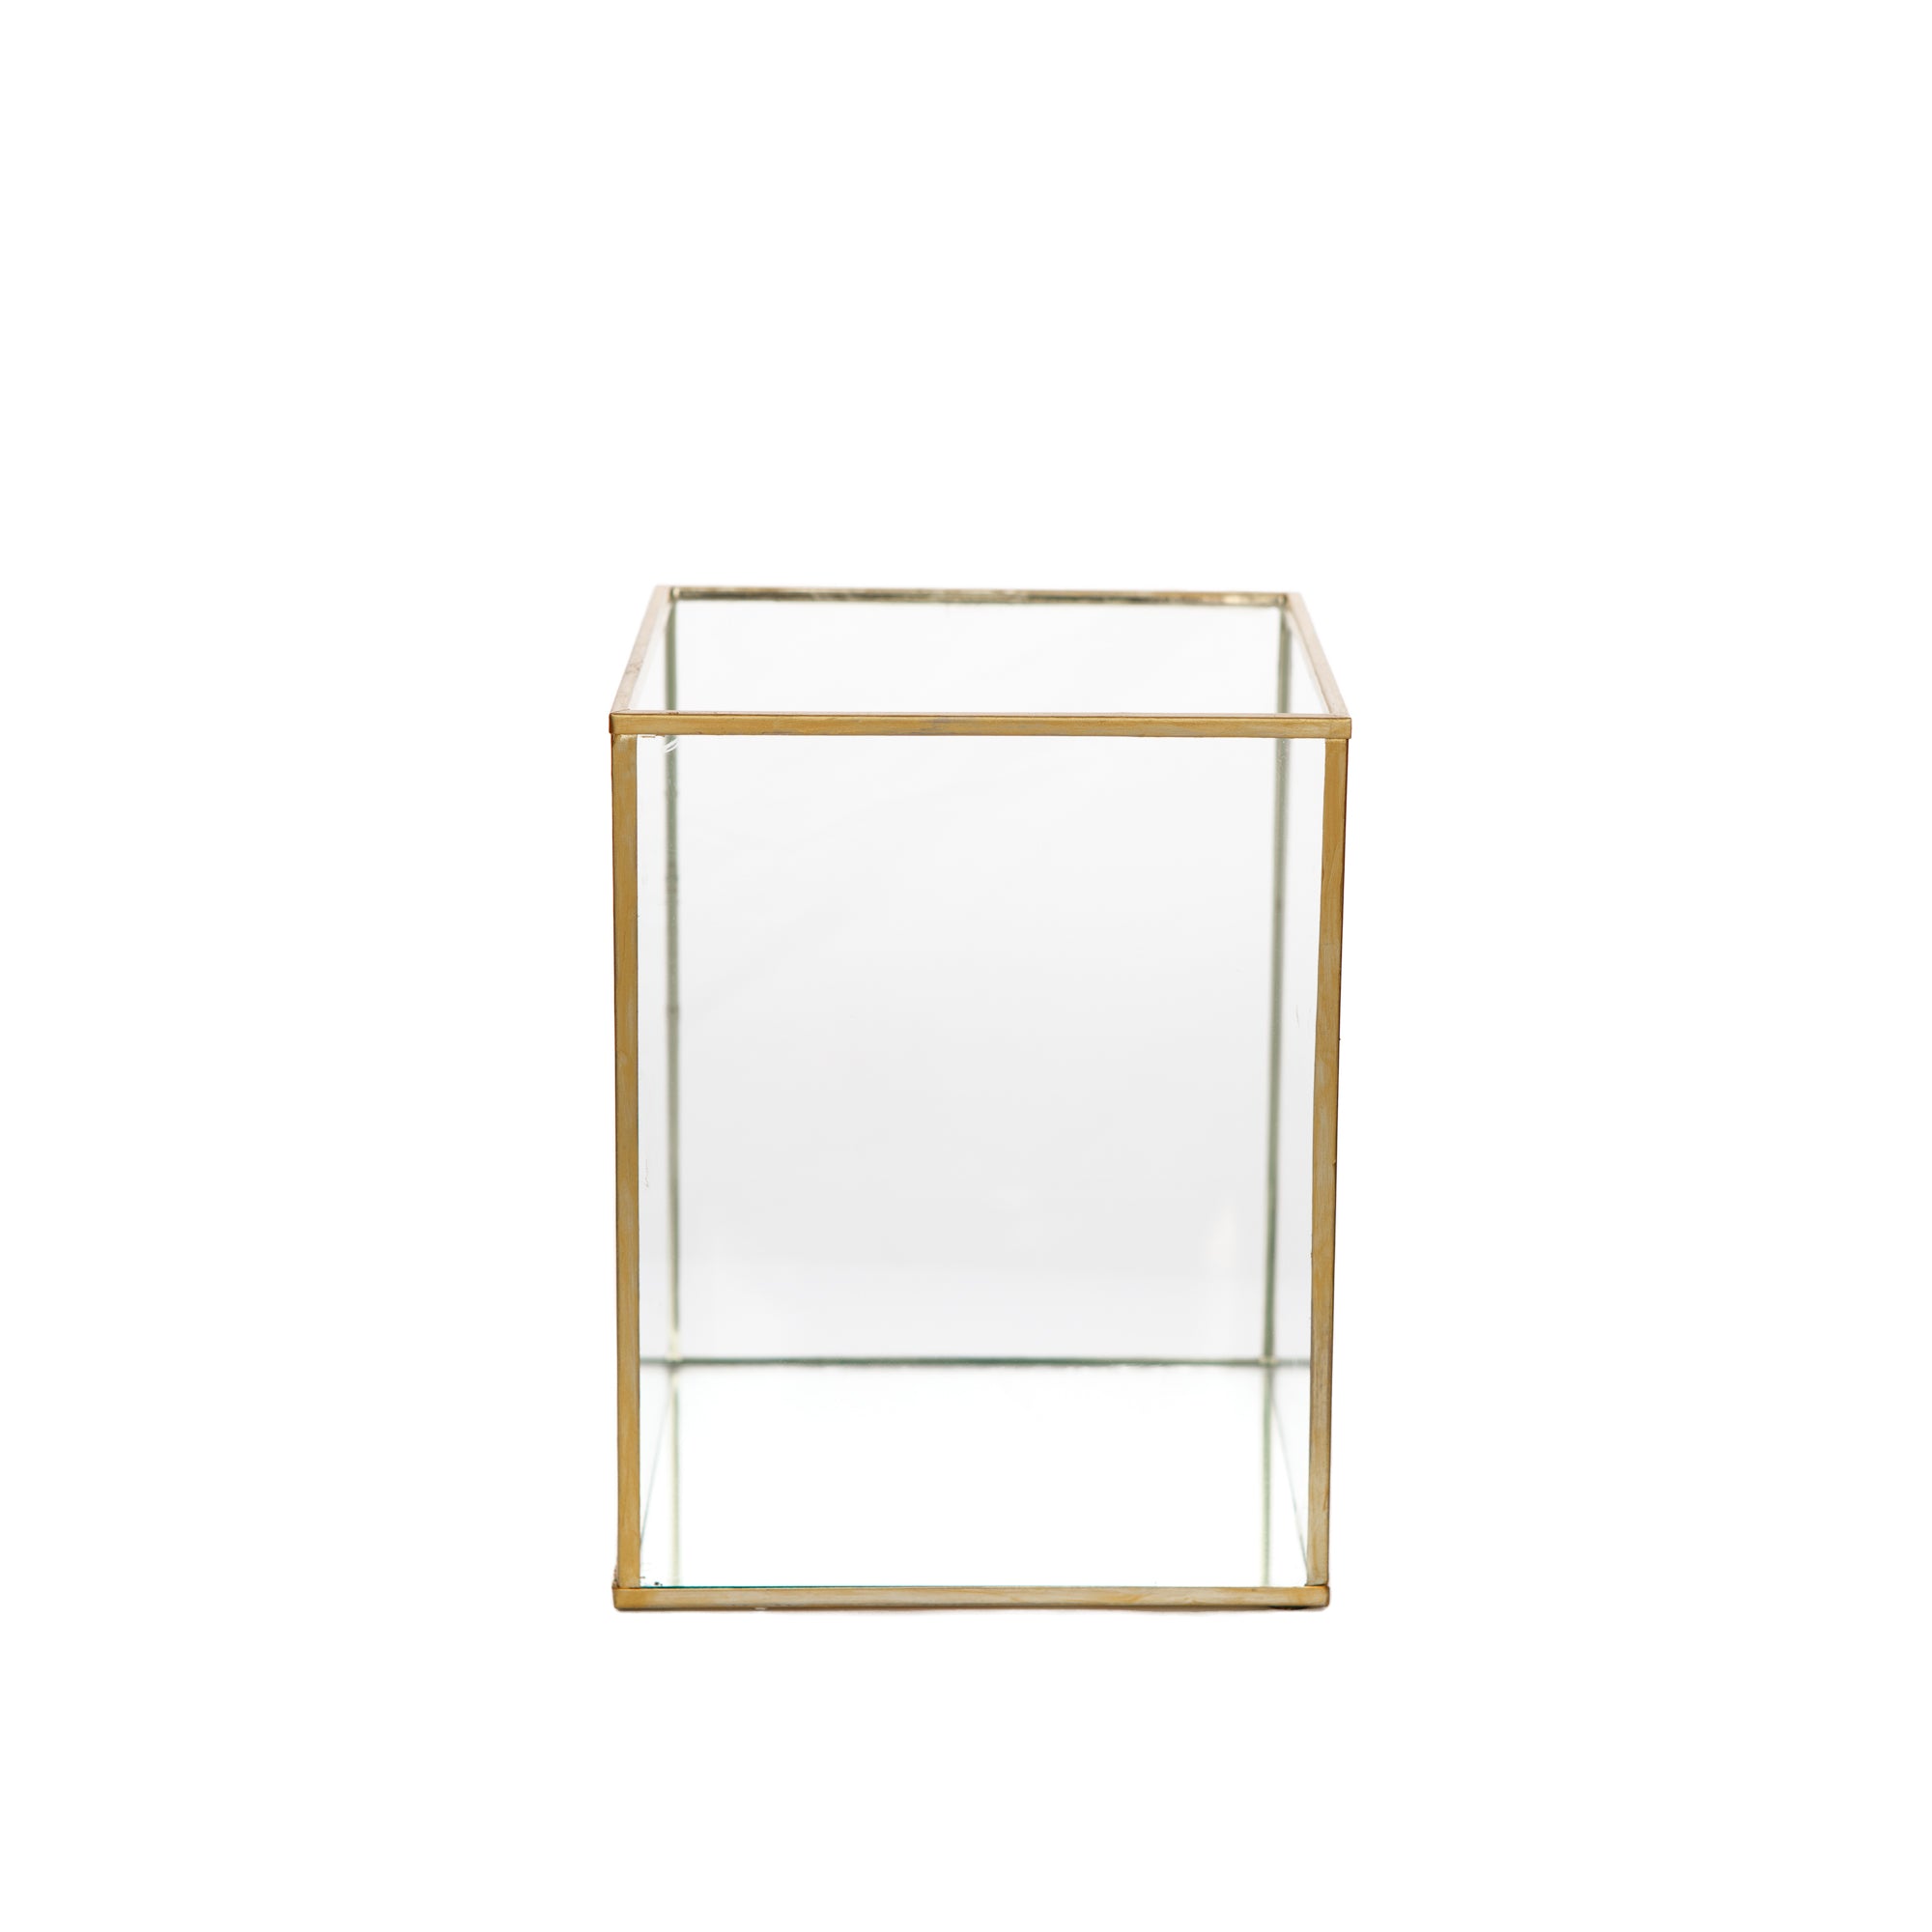 Gold framed square glass candle holders for hire | For Love & Living Gold Coast Weddings & Events